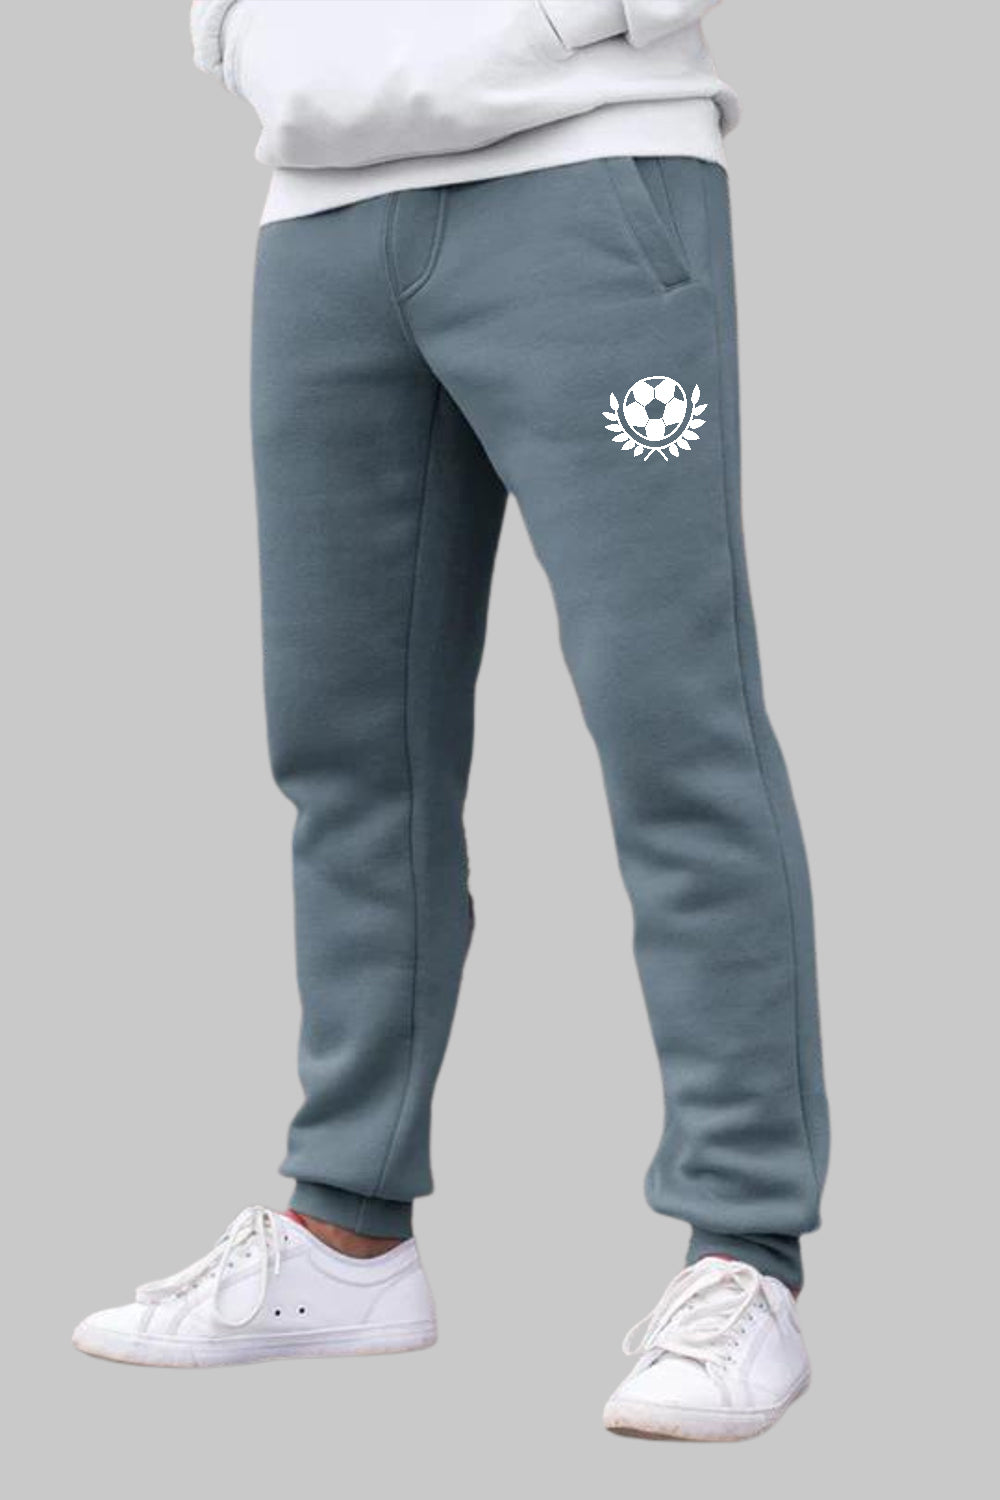 Football Graphic Printed Blue Grey Joggers